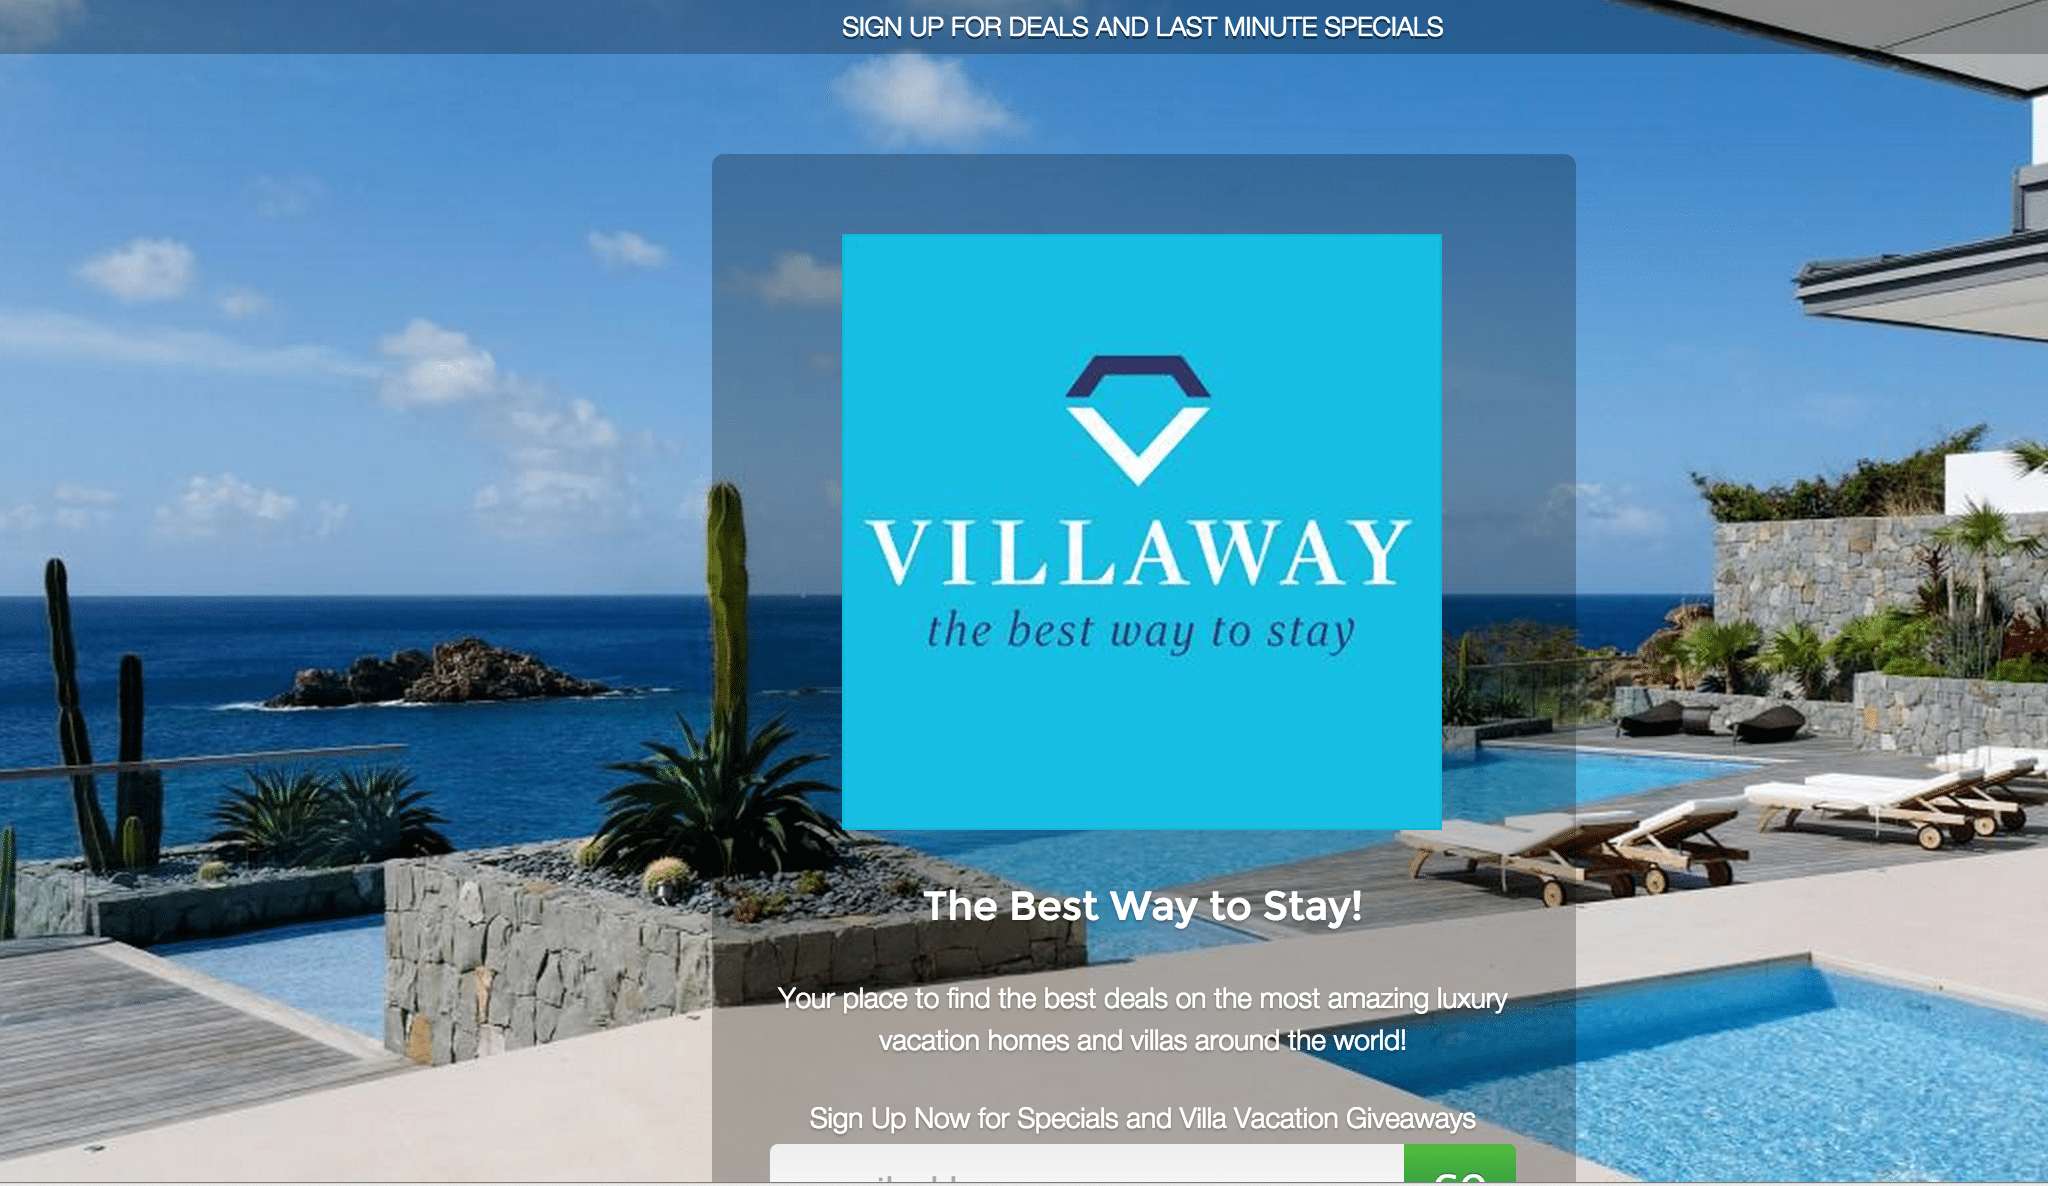 Villaway is a platform for booking luxury vacation rentals.